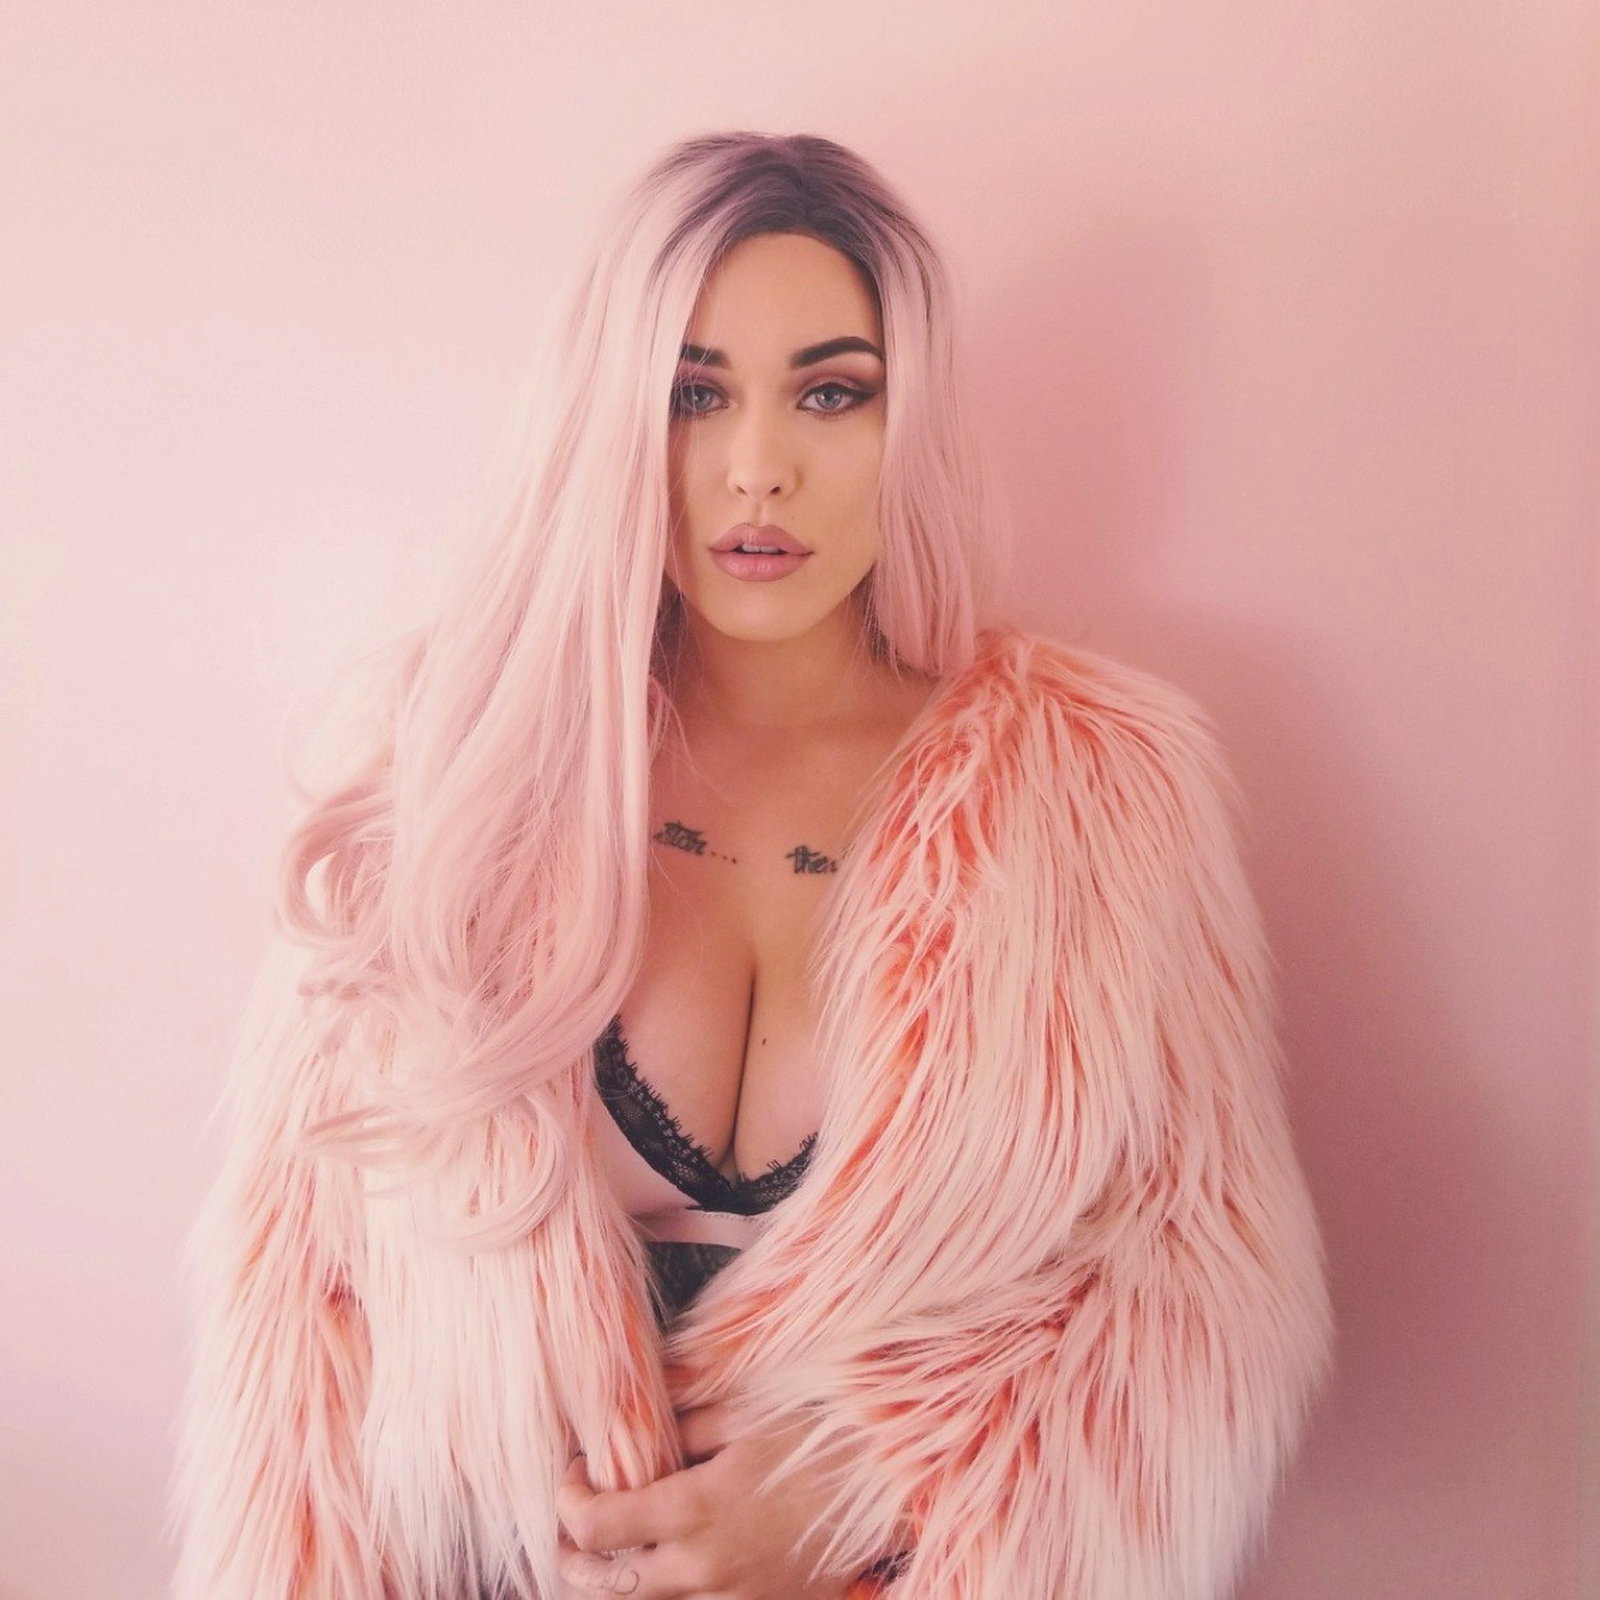 Photo by TrophyWomen with the username @TrophyWomen, who is a verified user,  May 15, 2018 at 10:41 PM and the text says 'dreamy-babydoll:

A demon in pink

  #love  #yourself  #pastel  #pink  #body  #positive  #aesthetic  #stevivi  #cynegetic  #dreamy-babydoll  #me  #fur  #bimbo  #bimbosdaily  #boobs  #breasts  #tits  #mammaries  #cleavage  #queen'